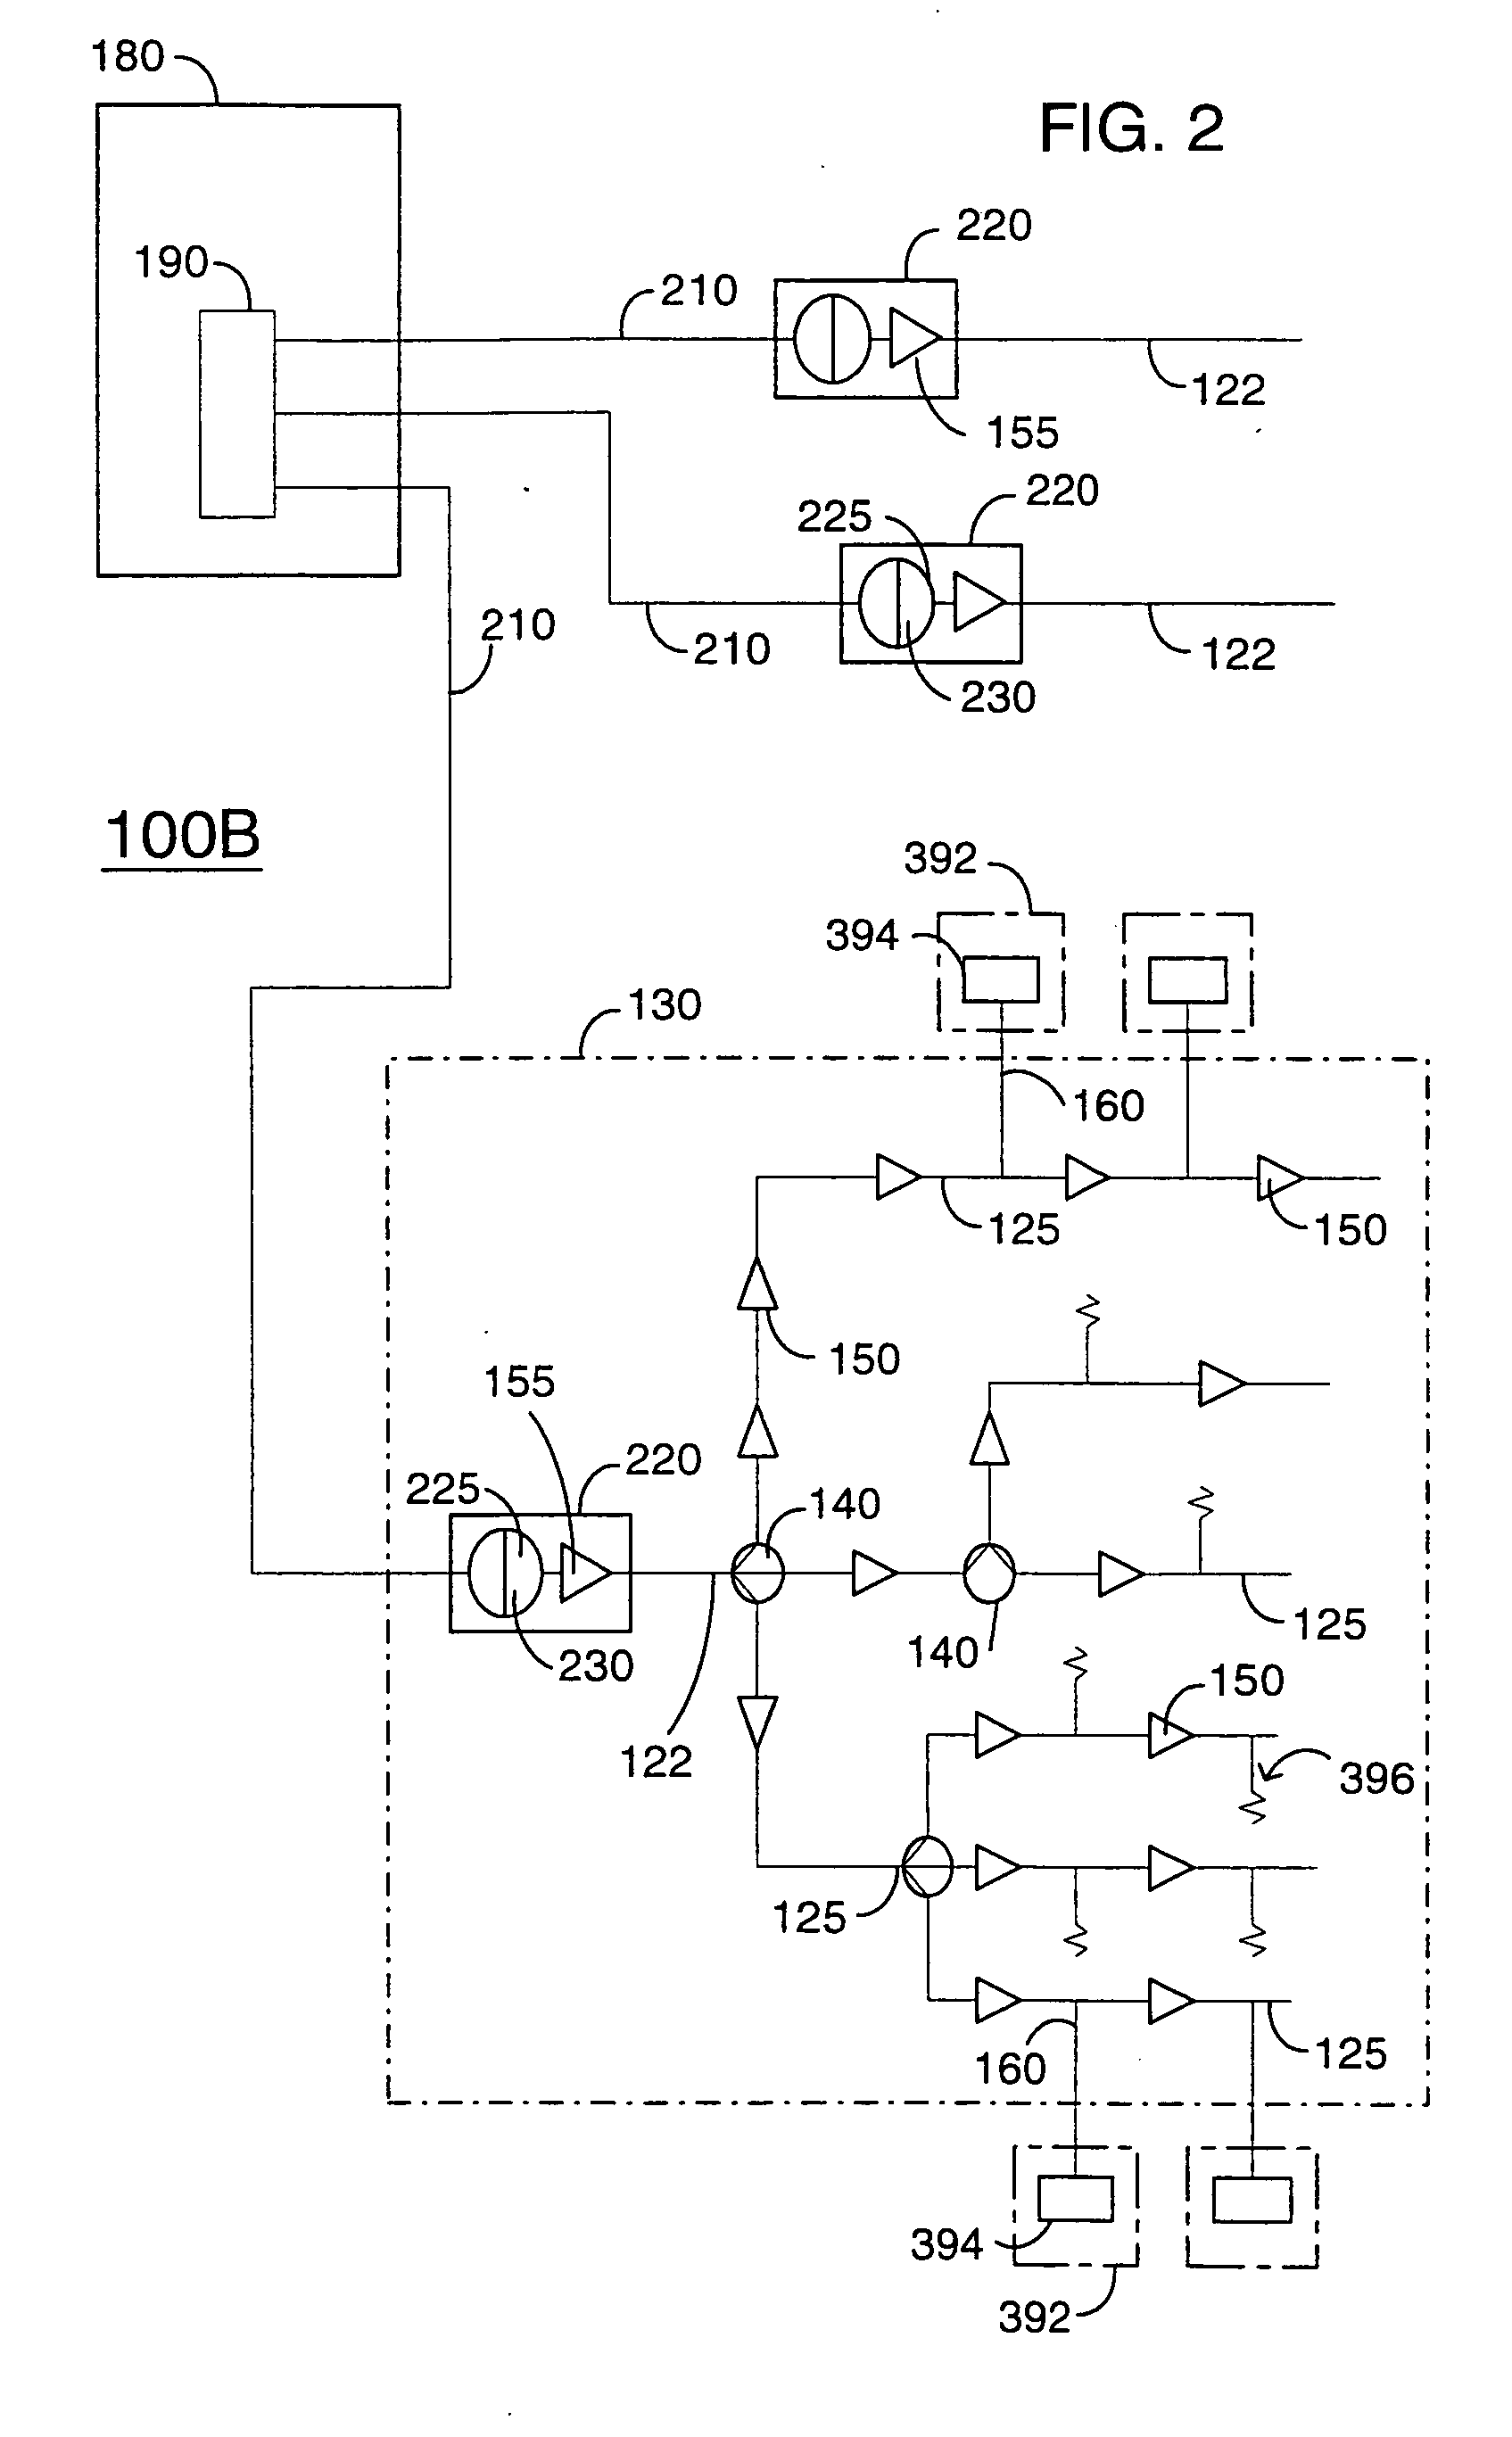 System and method for digitally monitoring a cable plant